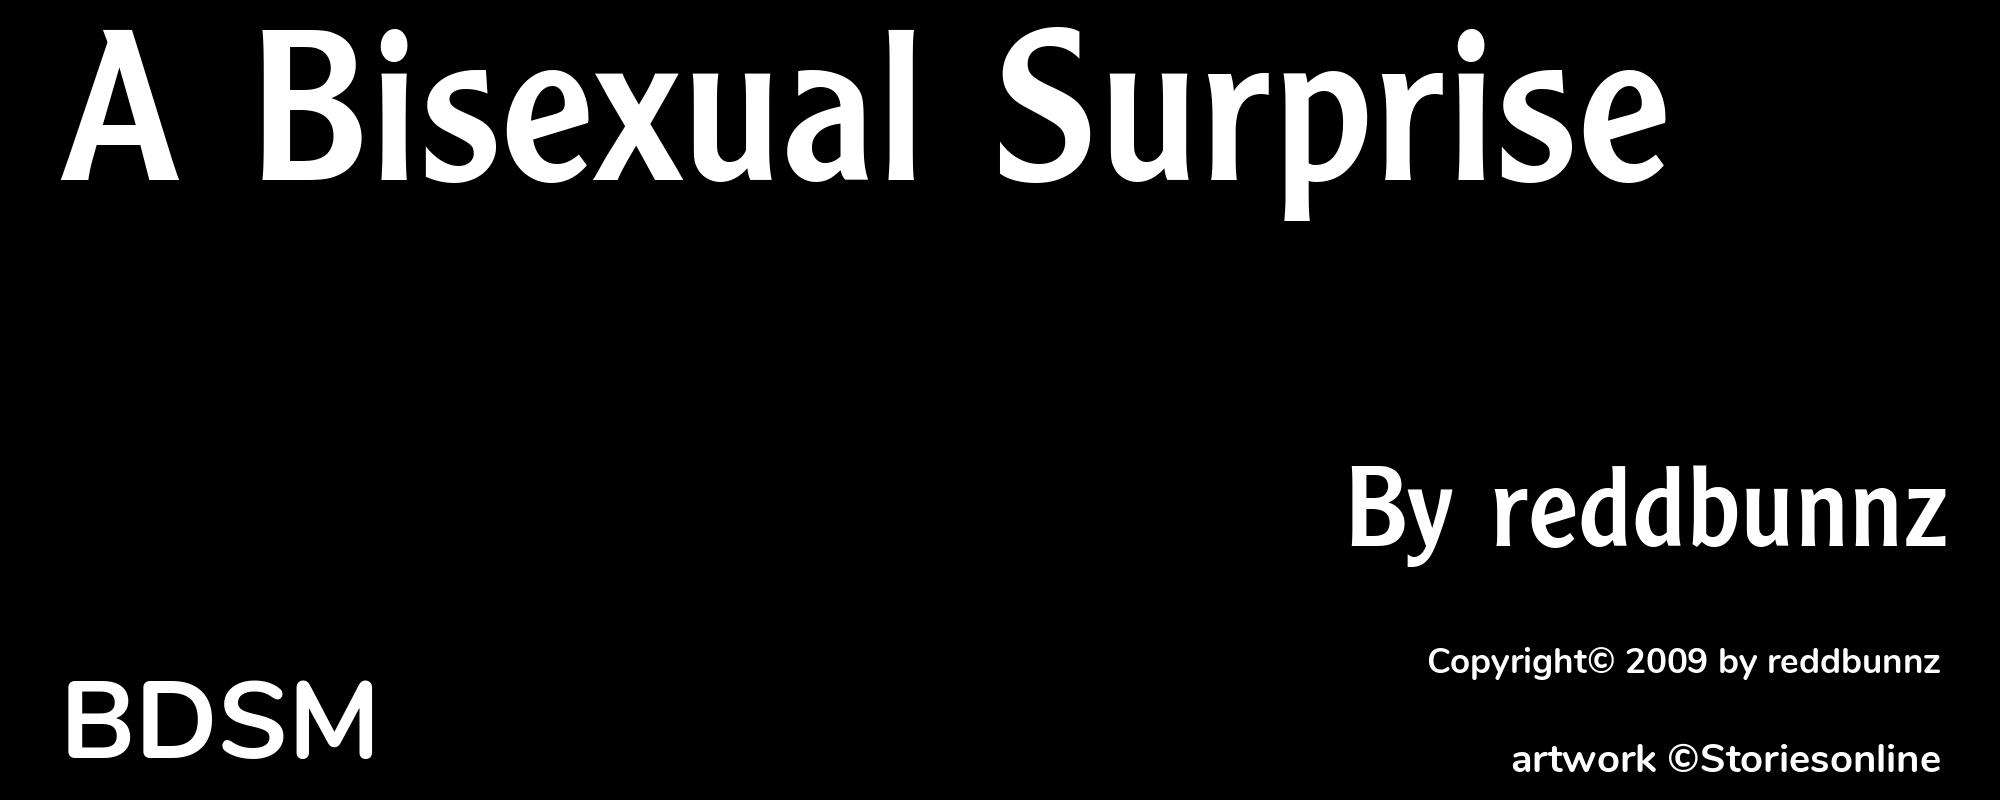 A Bisexual Surprise - Cover